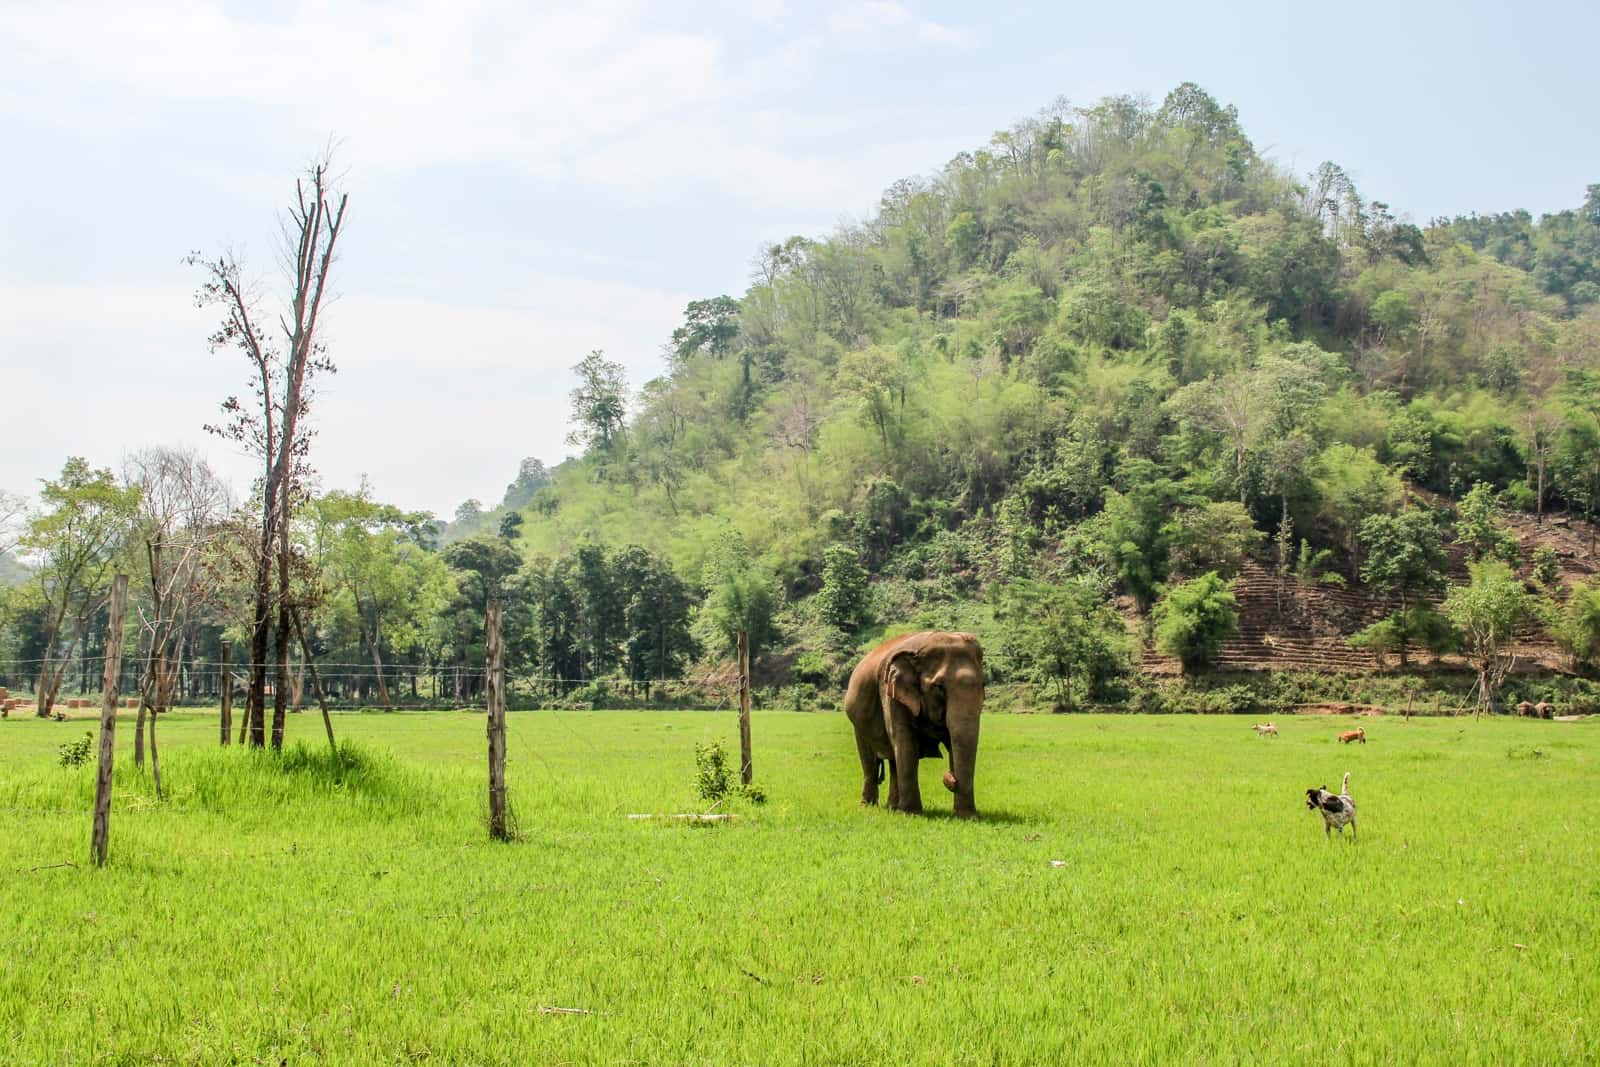 Elephant walking and not giving rides to tourists at the Elephant Nature Park in Chiang Mai, Thailand.